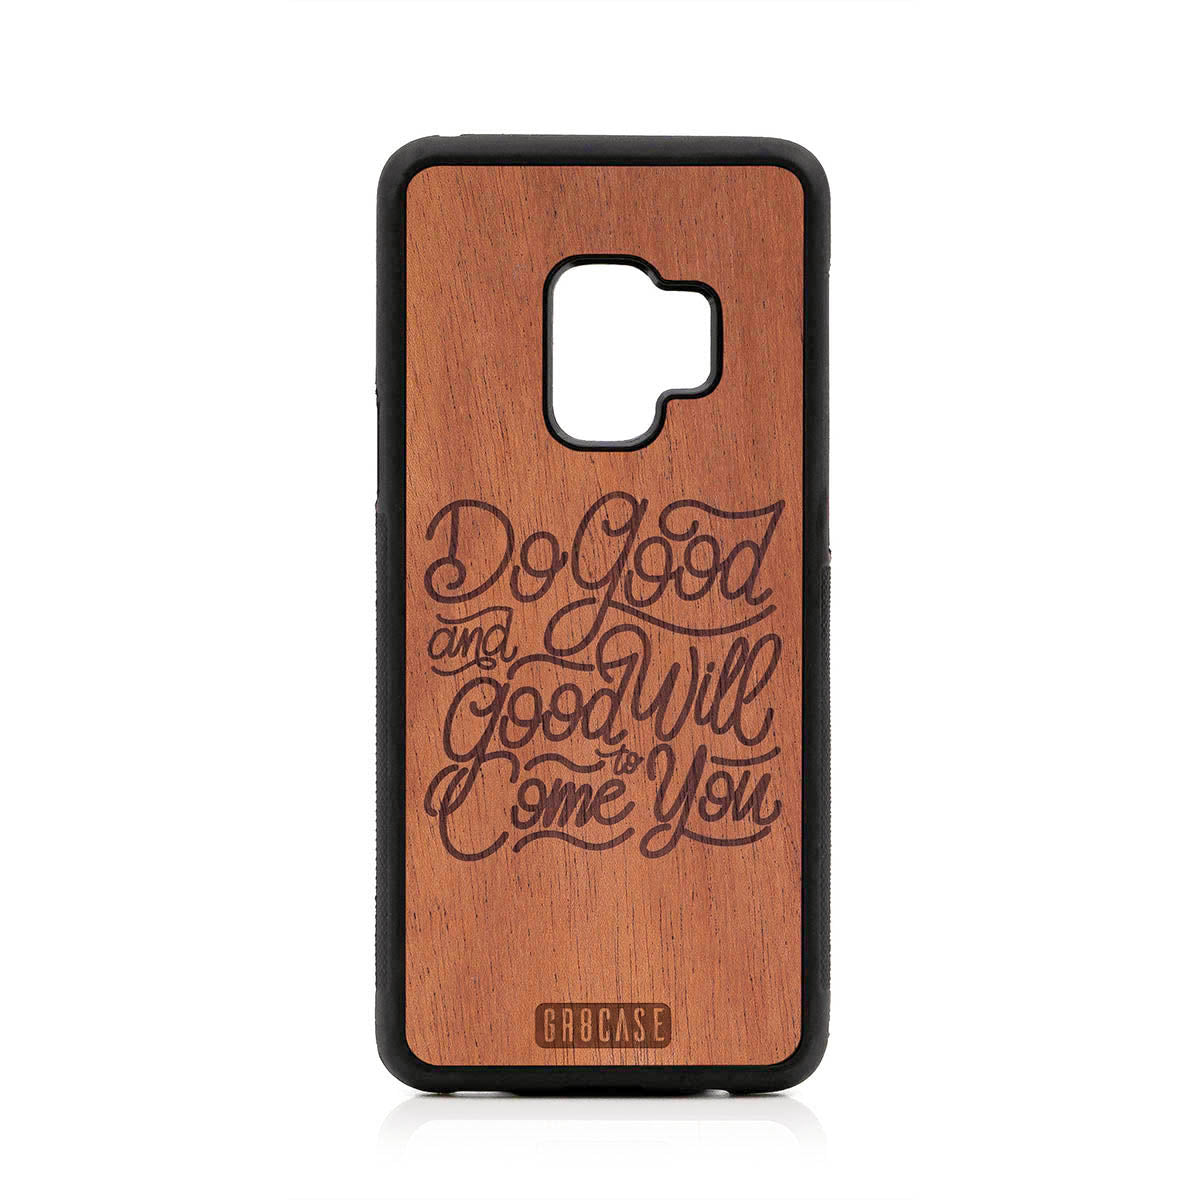 Do Good And Good Will Come To You Design Wood Case For Samsung Galaxy S9 by GR8CASE